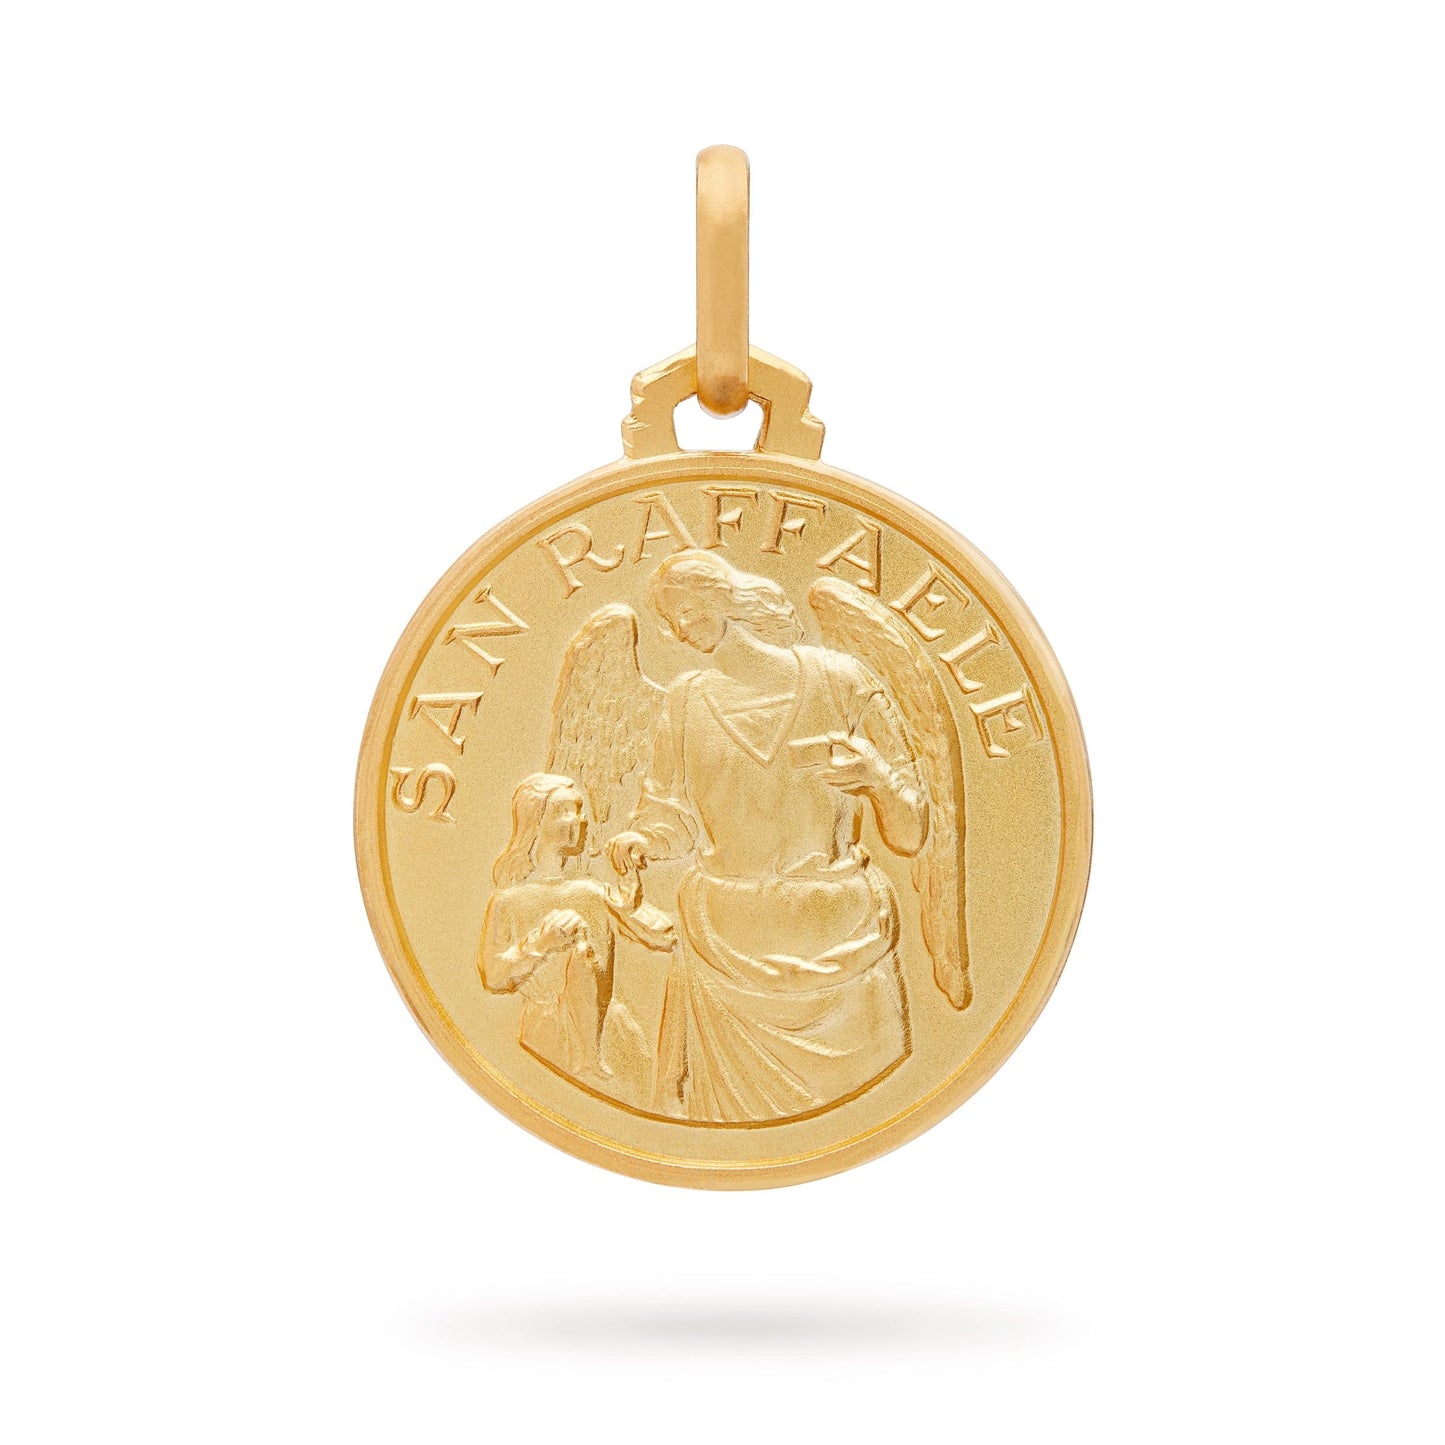 MONDO CATTOLICO Jewelry 18 mm (0.70 in) Gold medal of Saint Raphael the Archangel